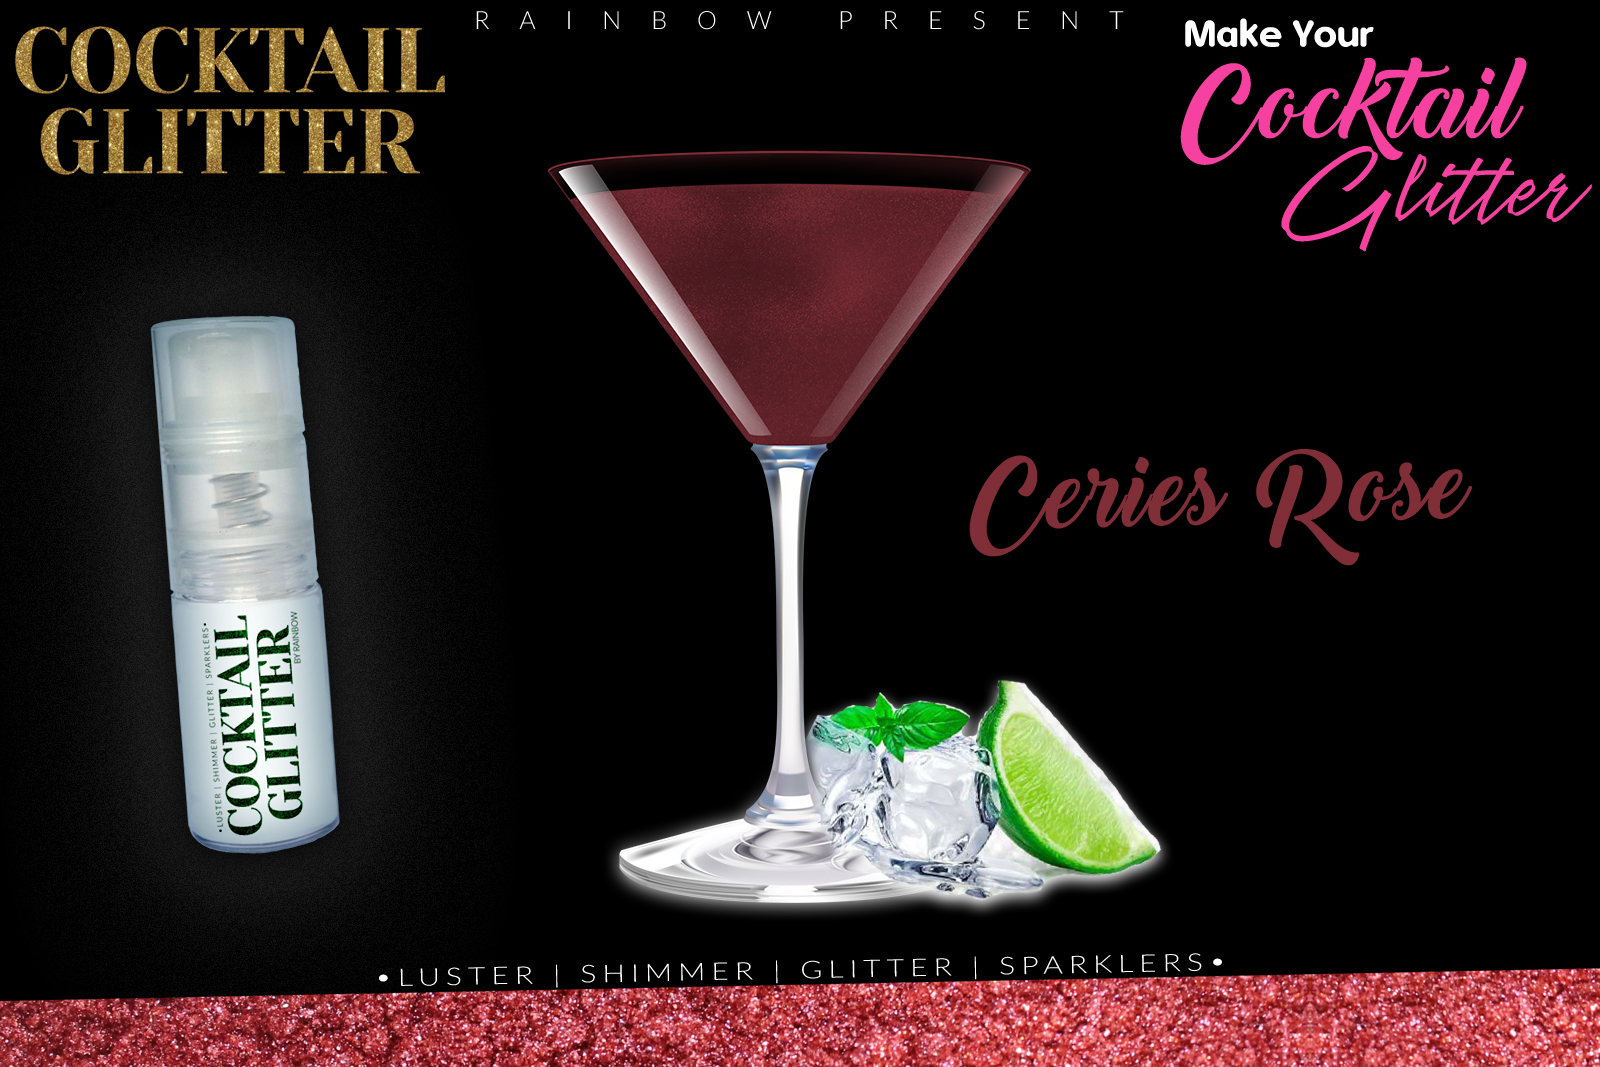 Glitzy Cocktail Glitter and Sparkling Effect | Edible | Ceries Rose